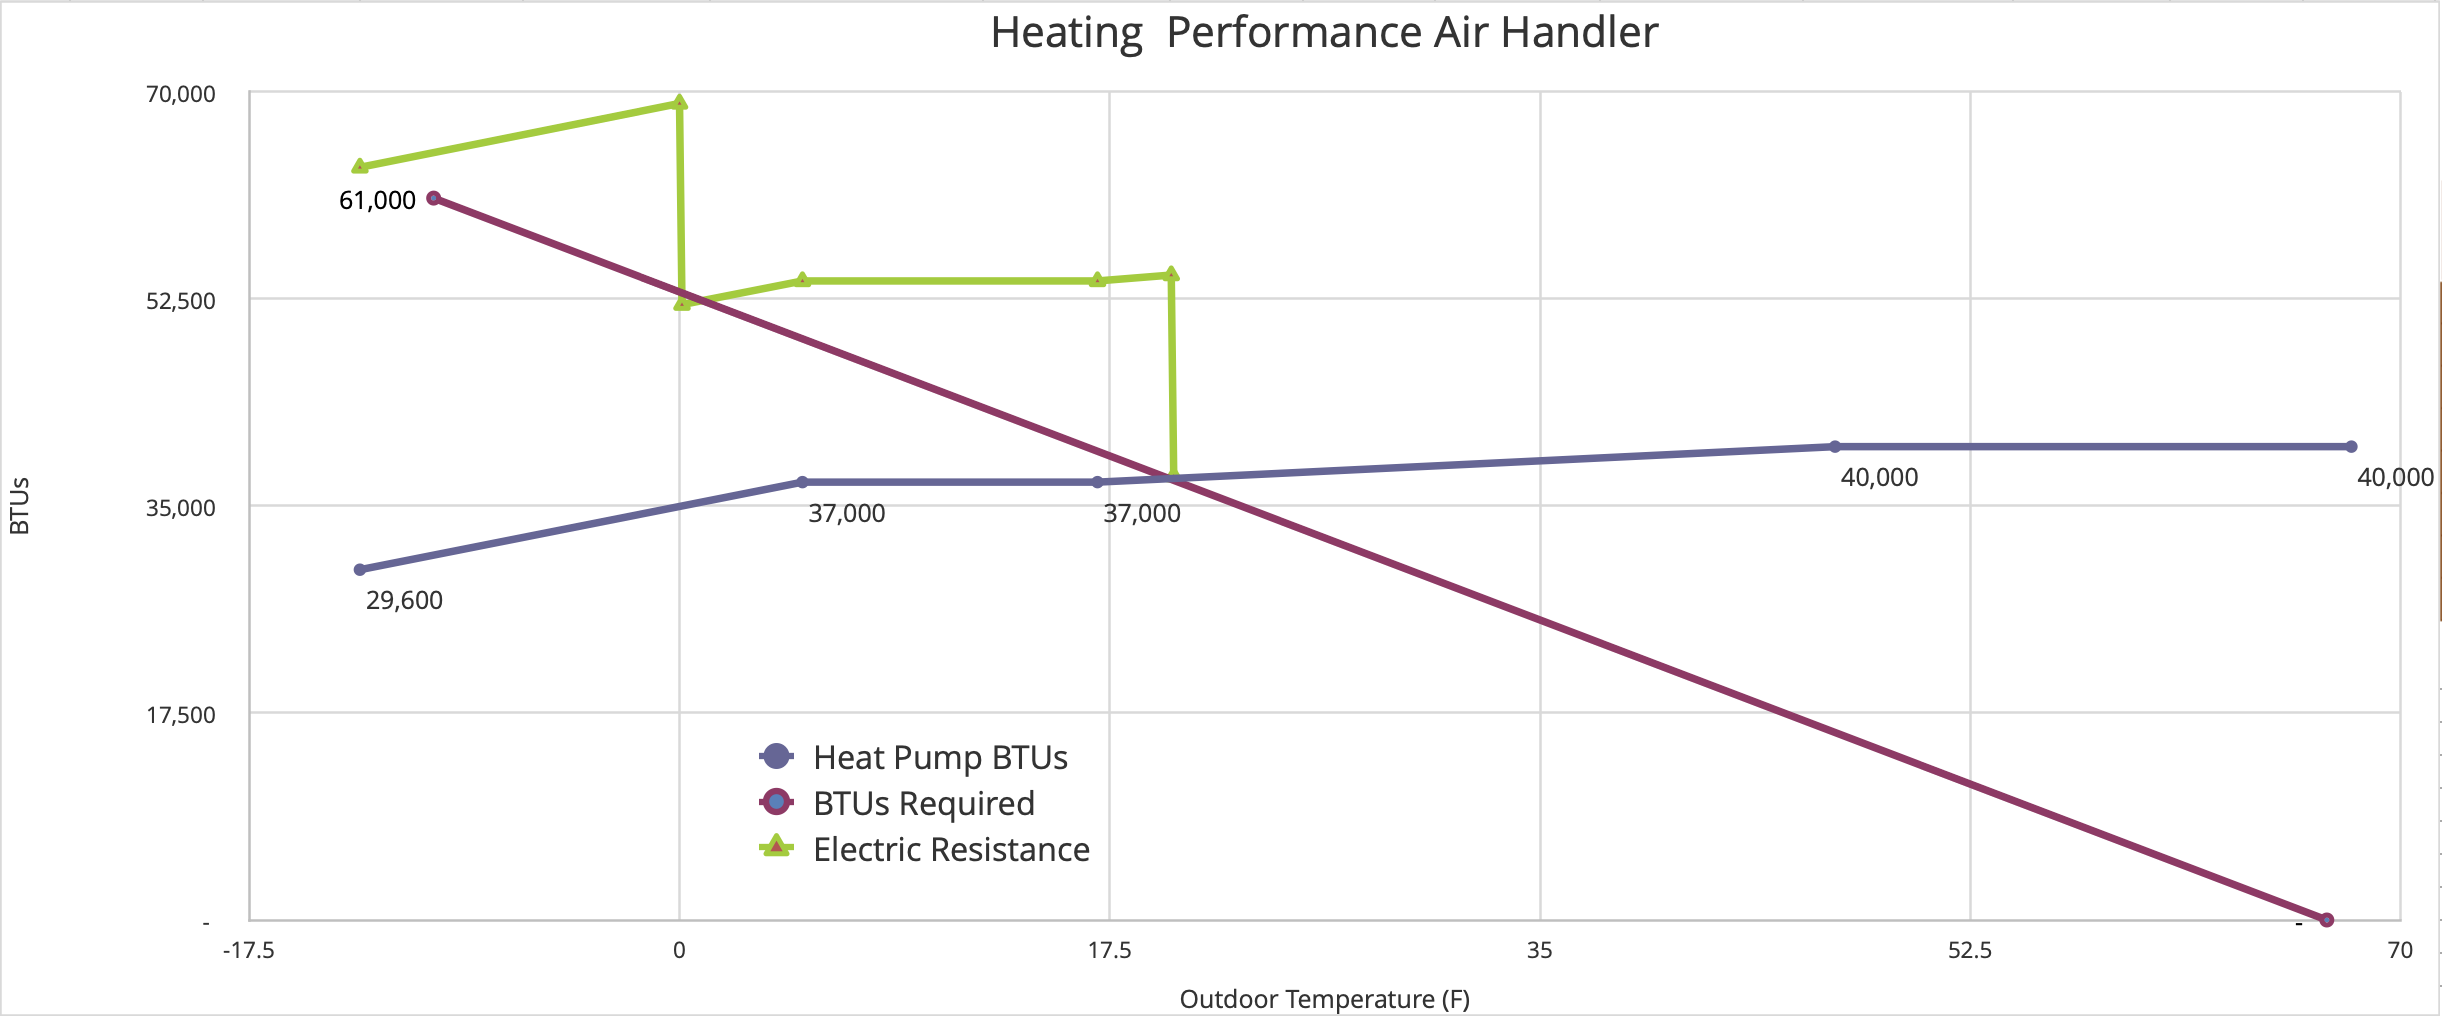 BTUs of heating provided by heat pumps and electric resistance. Chart provided by Energy Matters. The electric resistance component can turn on partially at 20 degrees F and fully at 0 degrees F.